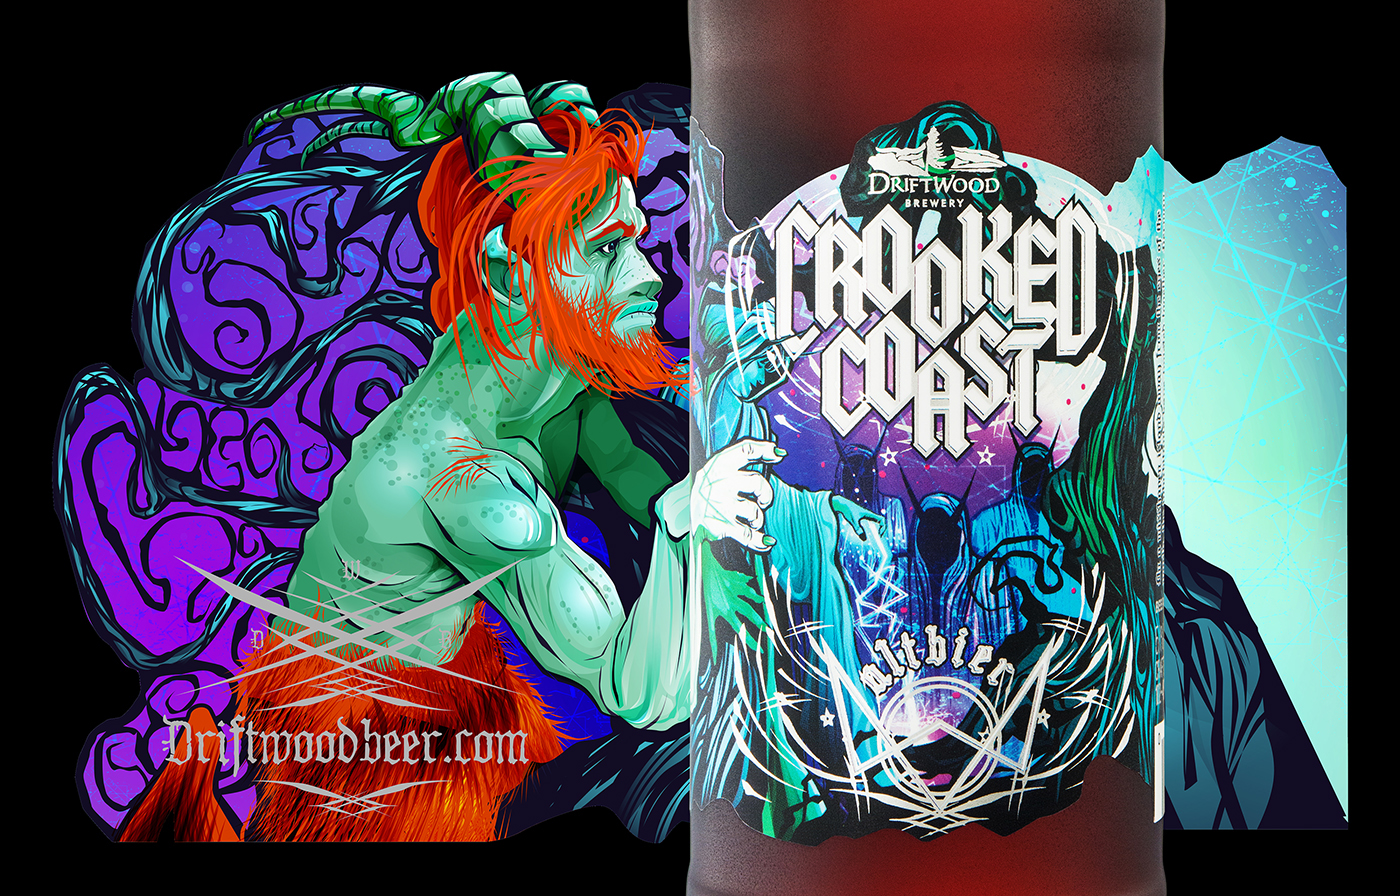 beer craftbeer altbier crooked Coast gnarly beer labels off centre asymmetrical